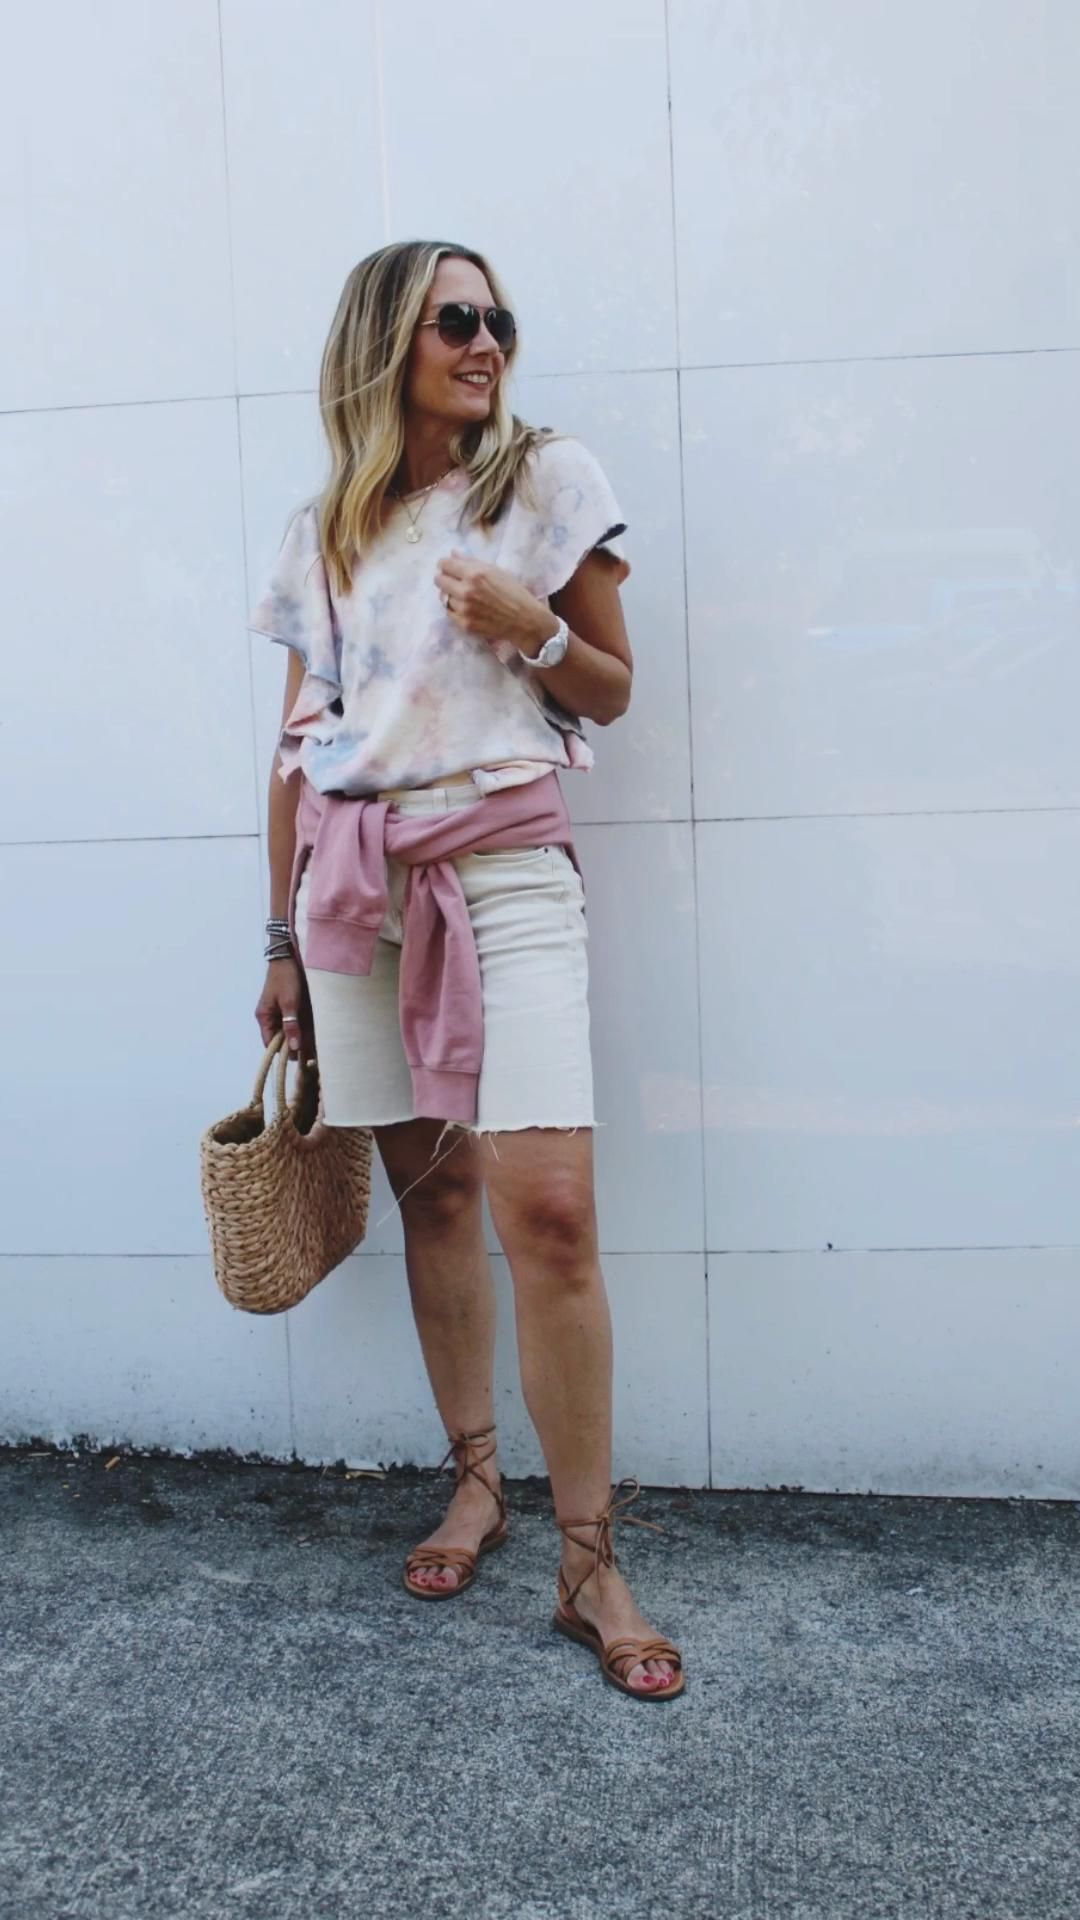 Tie Shorts Outfit Ideas for
  Women